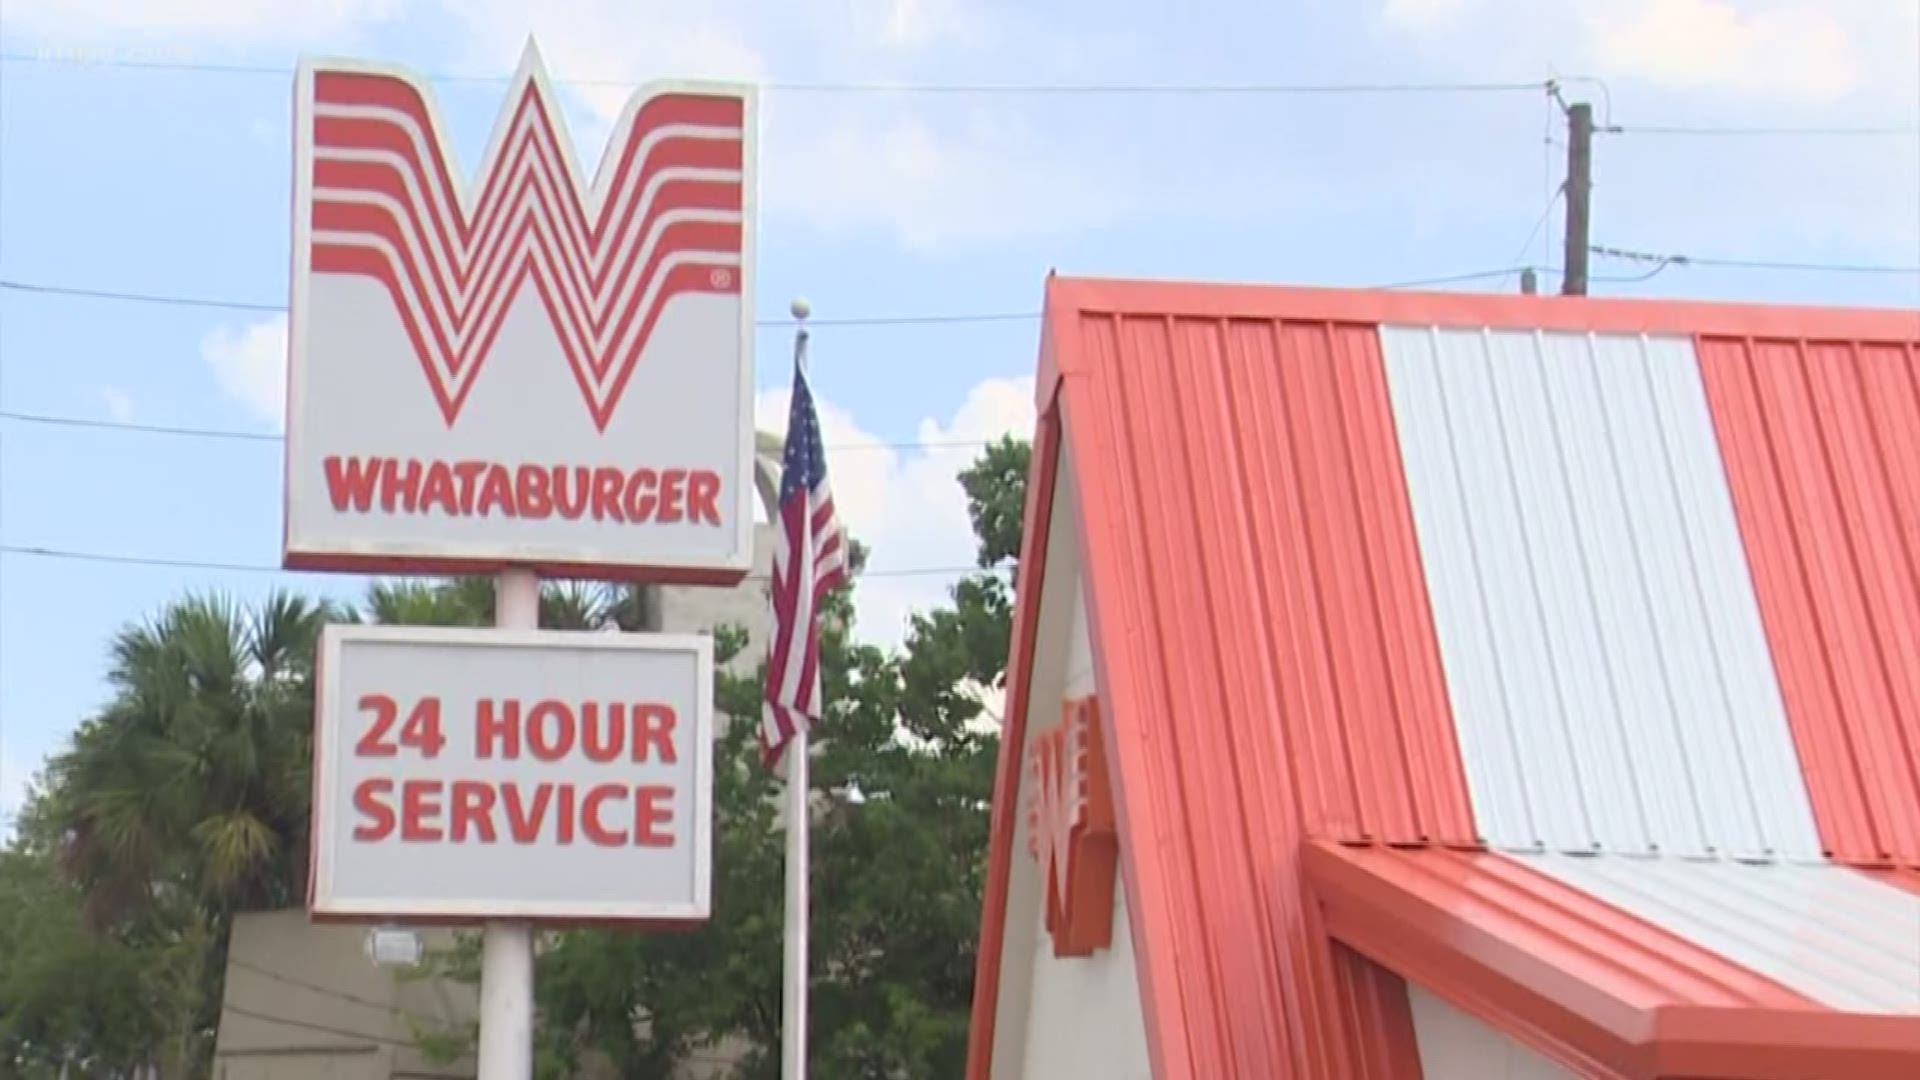 A Chicago firm called BDT Capital Partners agreed to acquire a majority stake in Whataburger from the family who founded it in the 1950s. The family will remain a minority owner and Whataburger’s headquarters will stay in San Antonio.